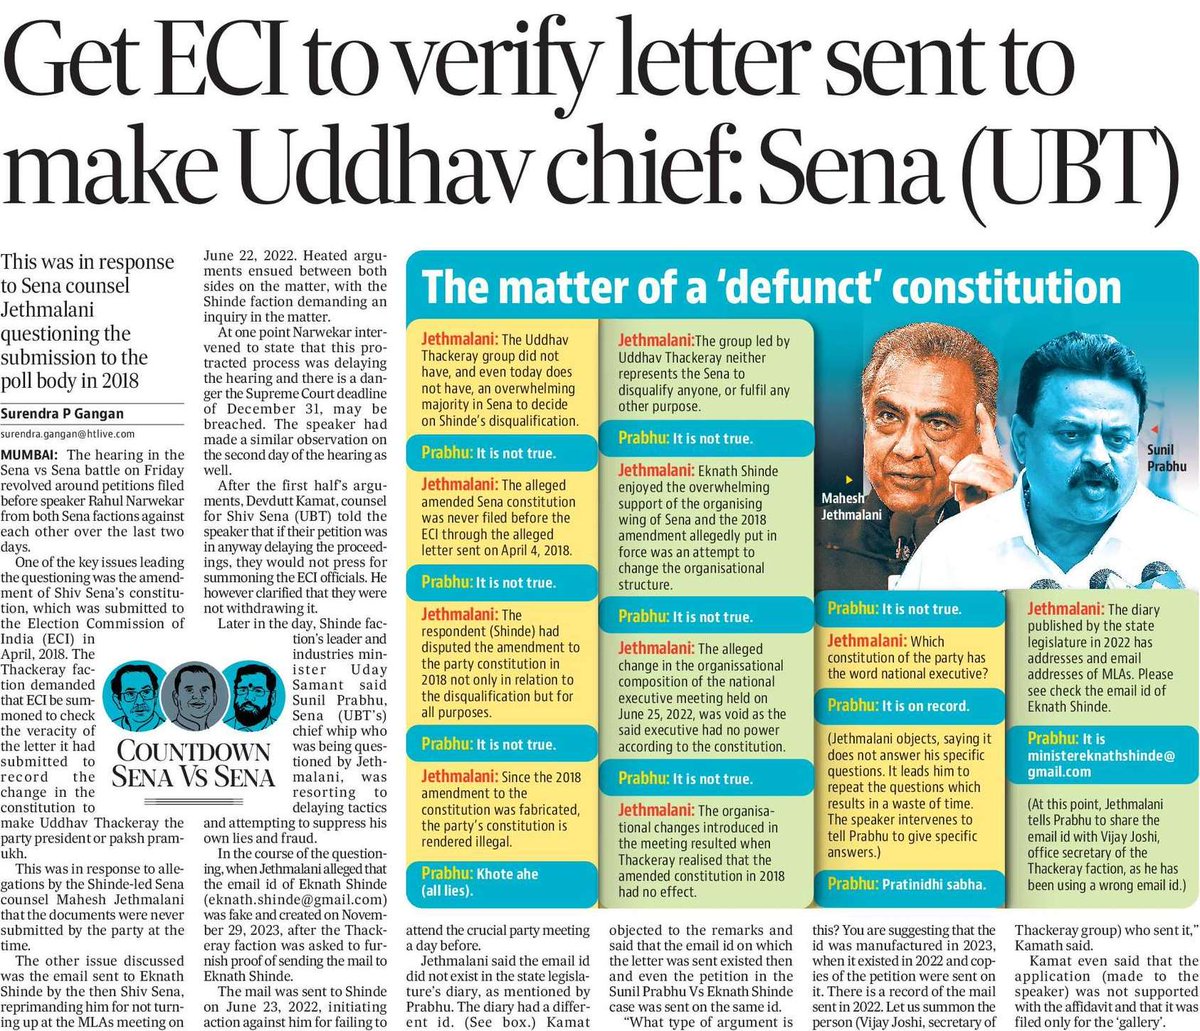 [Countdown Sena Vs Sena] Get ECI to verify letter sent to make Uddhav chief: Sena (UBT) This was in response to Sena counsel Jethmalani questioning the submission to the poll body in 2018 @htTweets @s_gangan